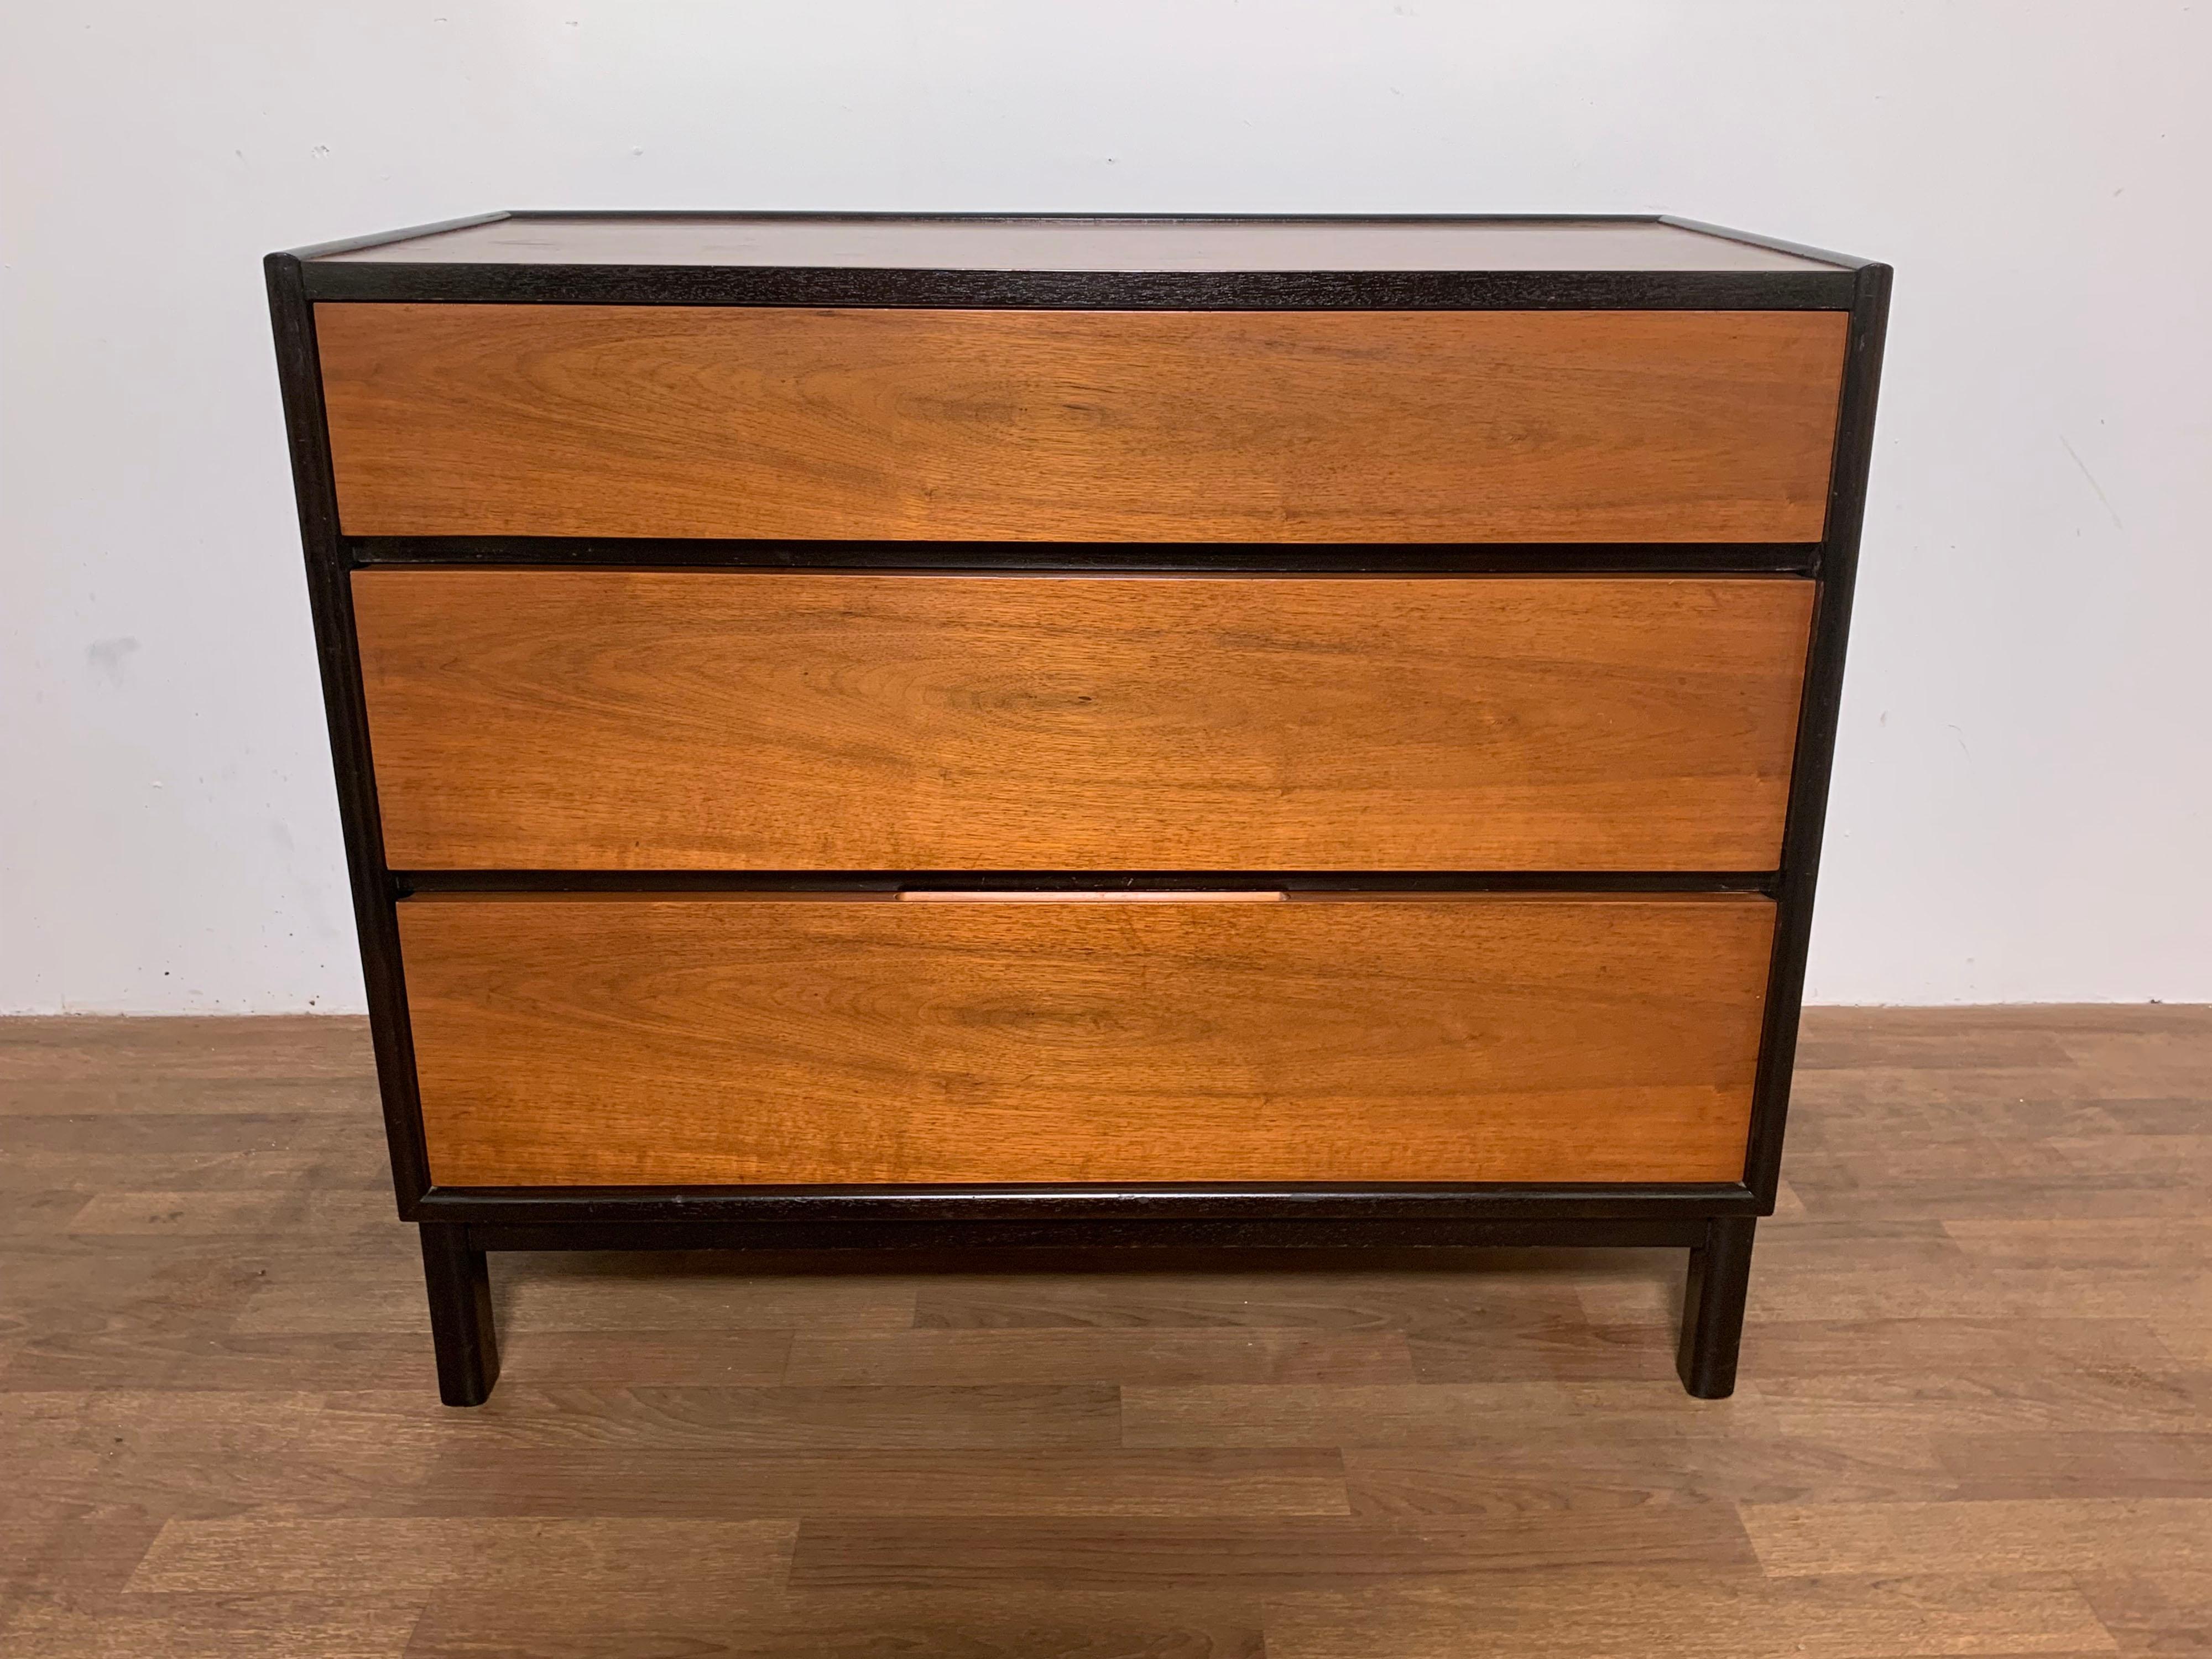 Mid-20th Century Edward Wormley for Dunbar Two Tone Dresser in Mahogany and Rosewood Circa 1960s For Sale